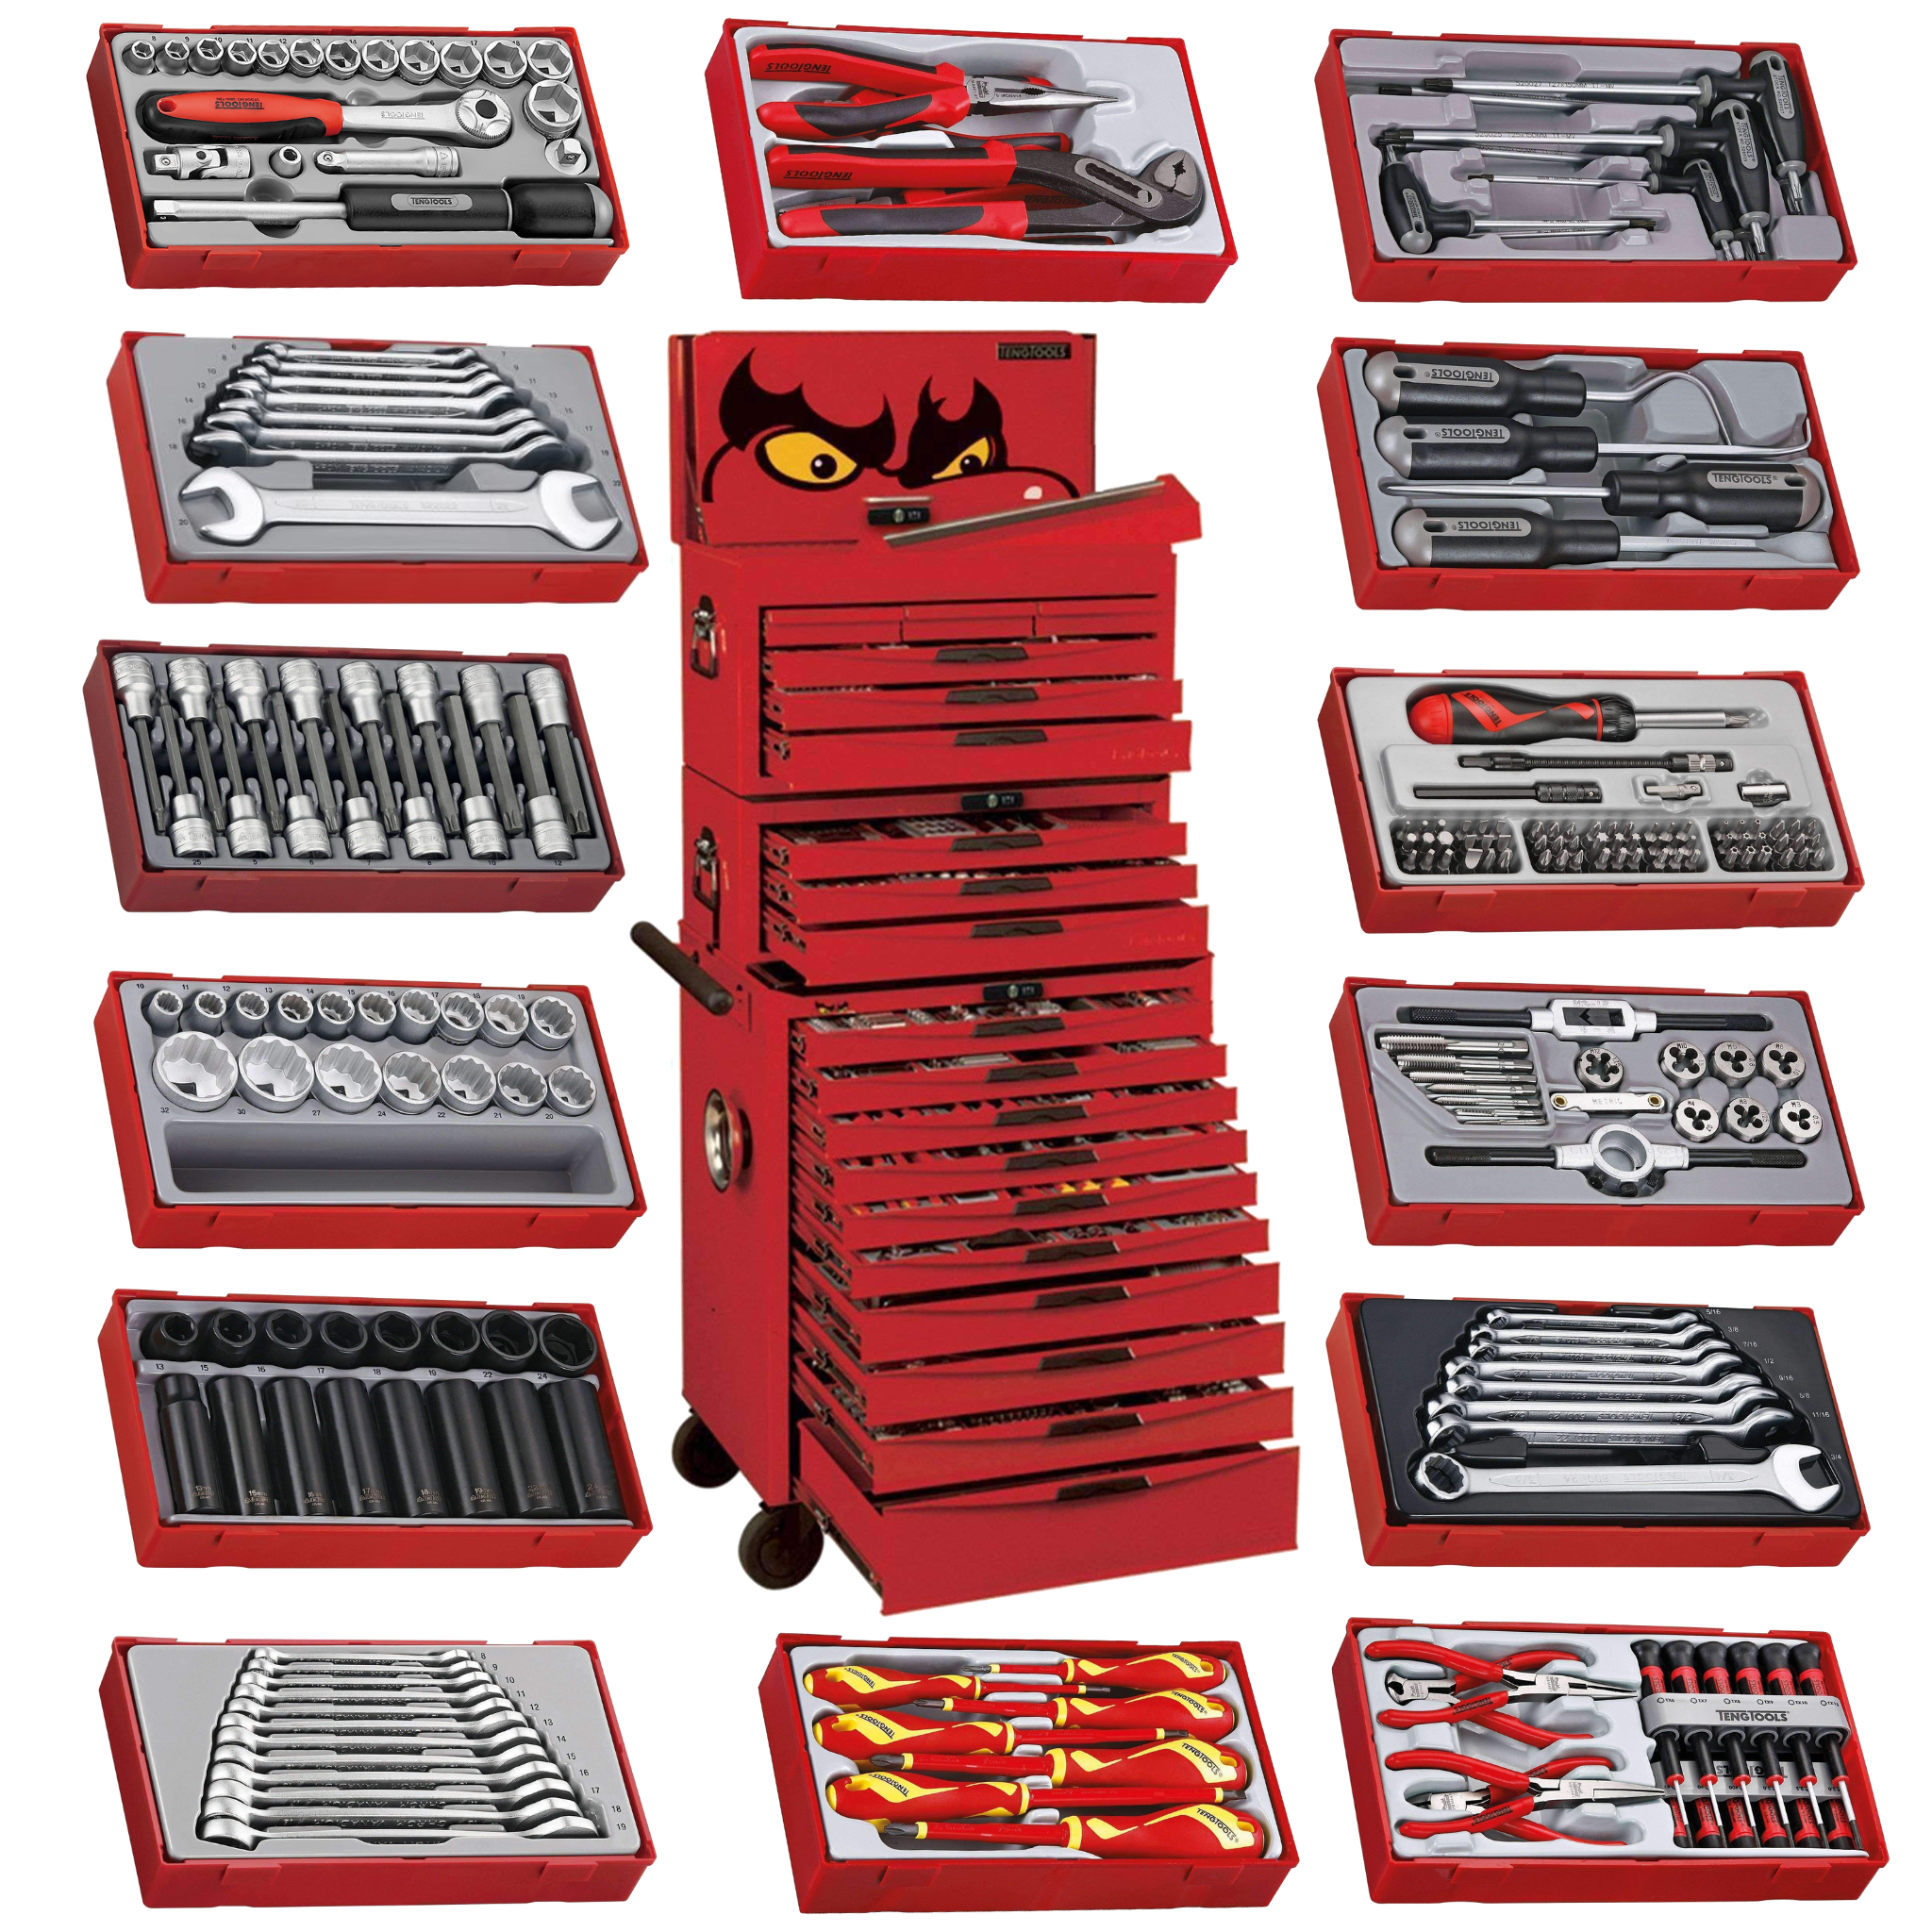 Tool Box (Empty) for 20pc. Kit for Electrical Contractors